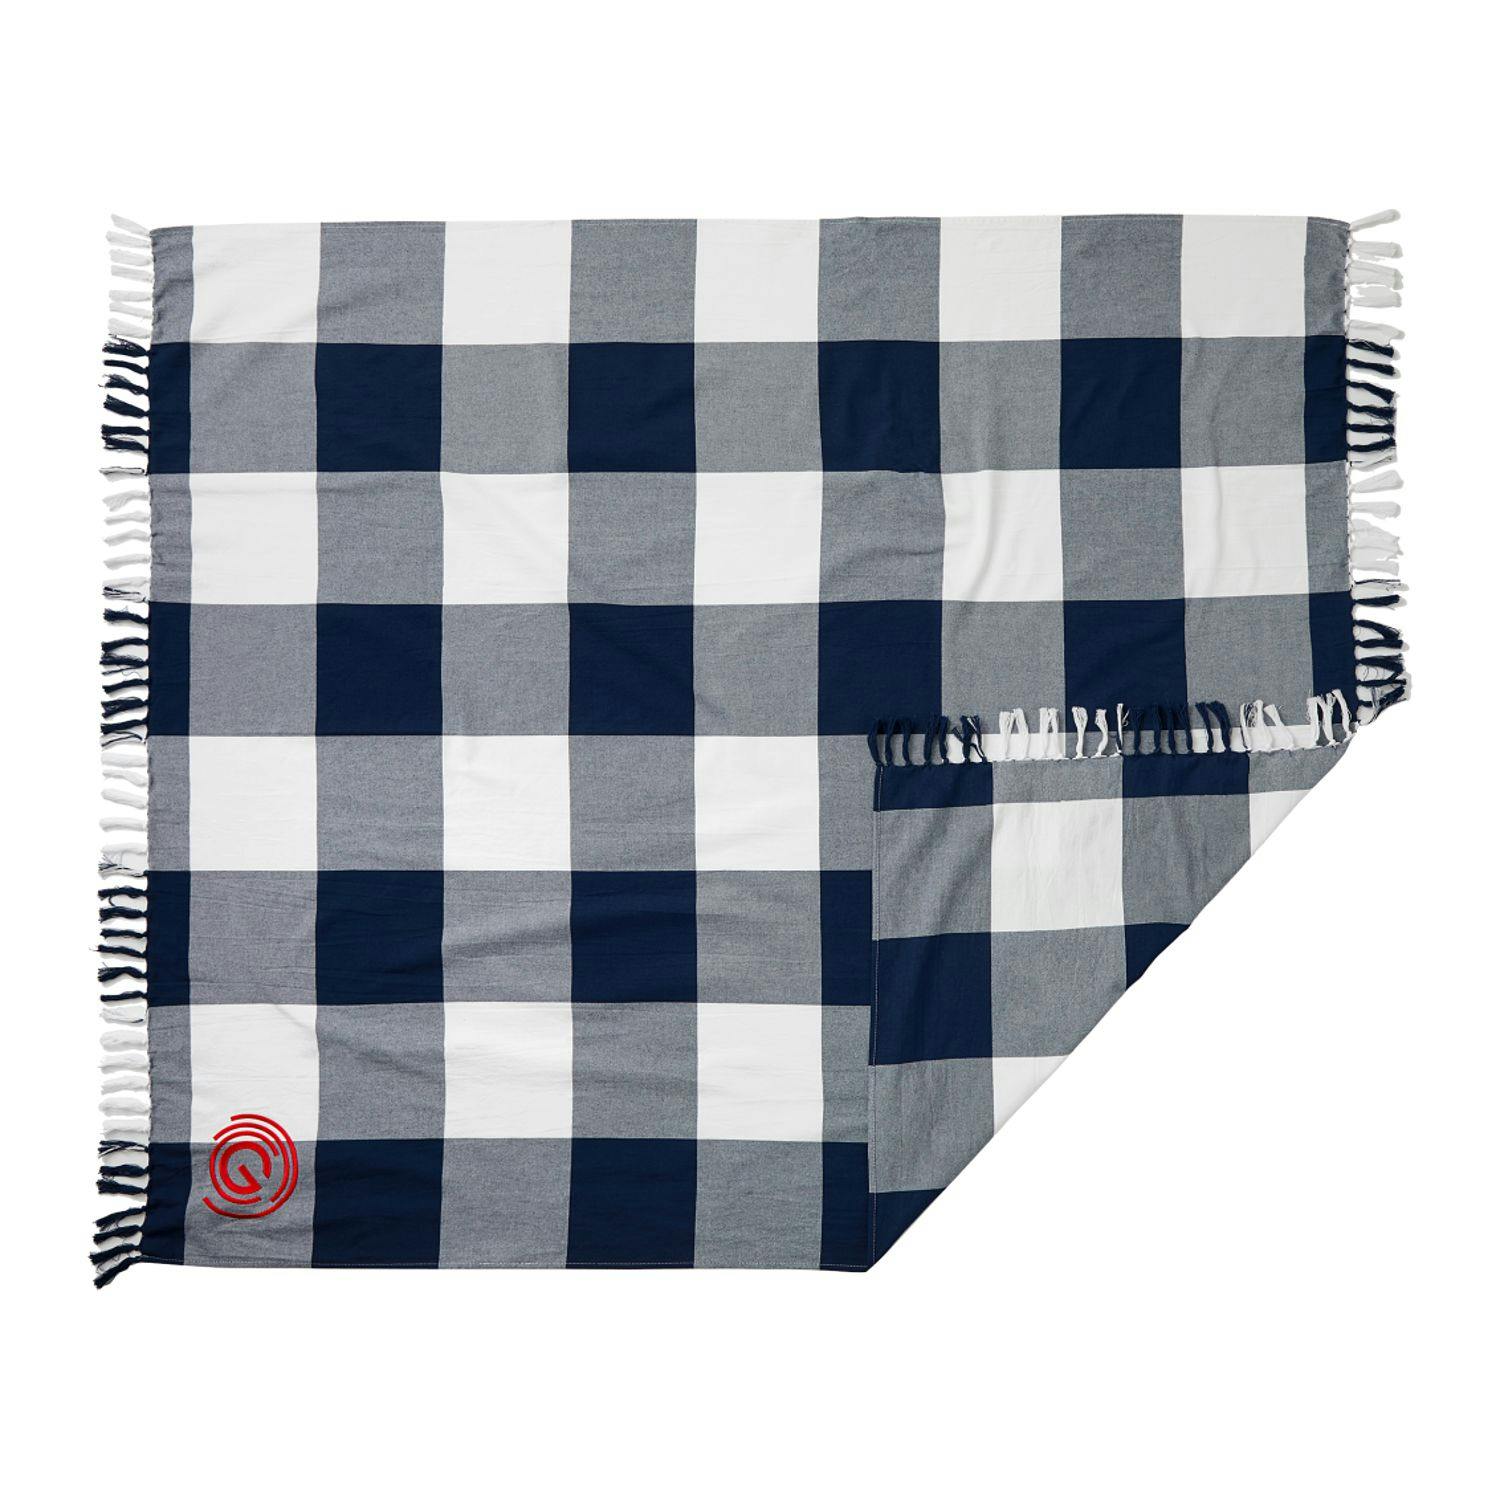 Field & Co. 100% Organic Cotton Check Throw Blanke - additional Image 3